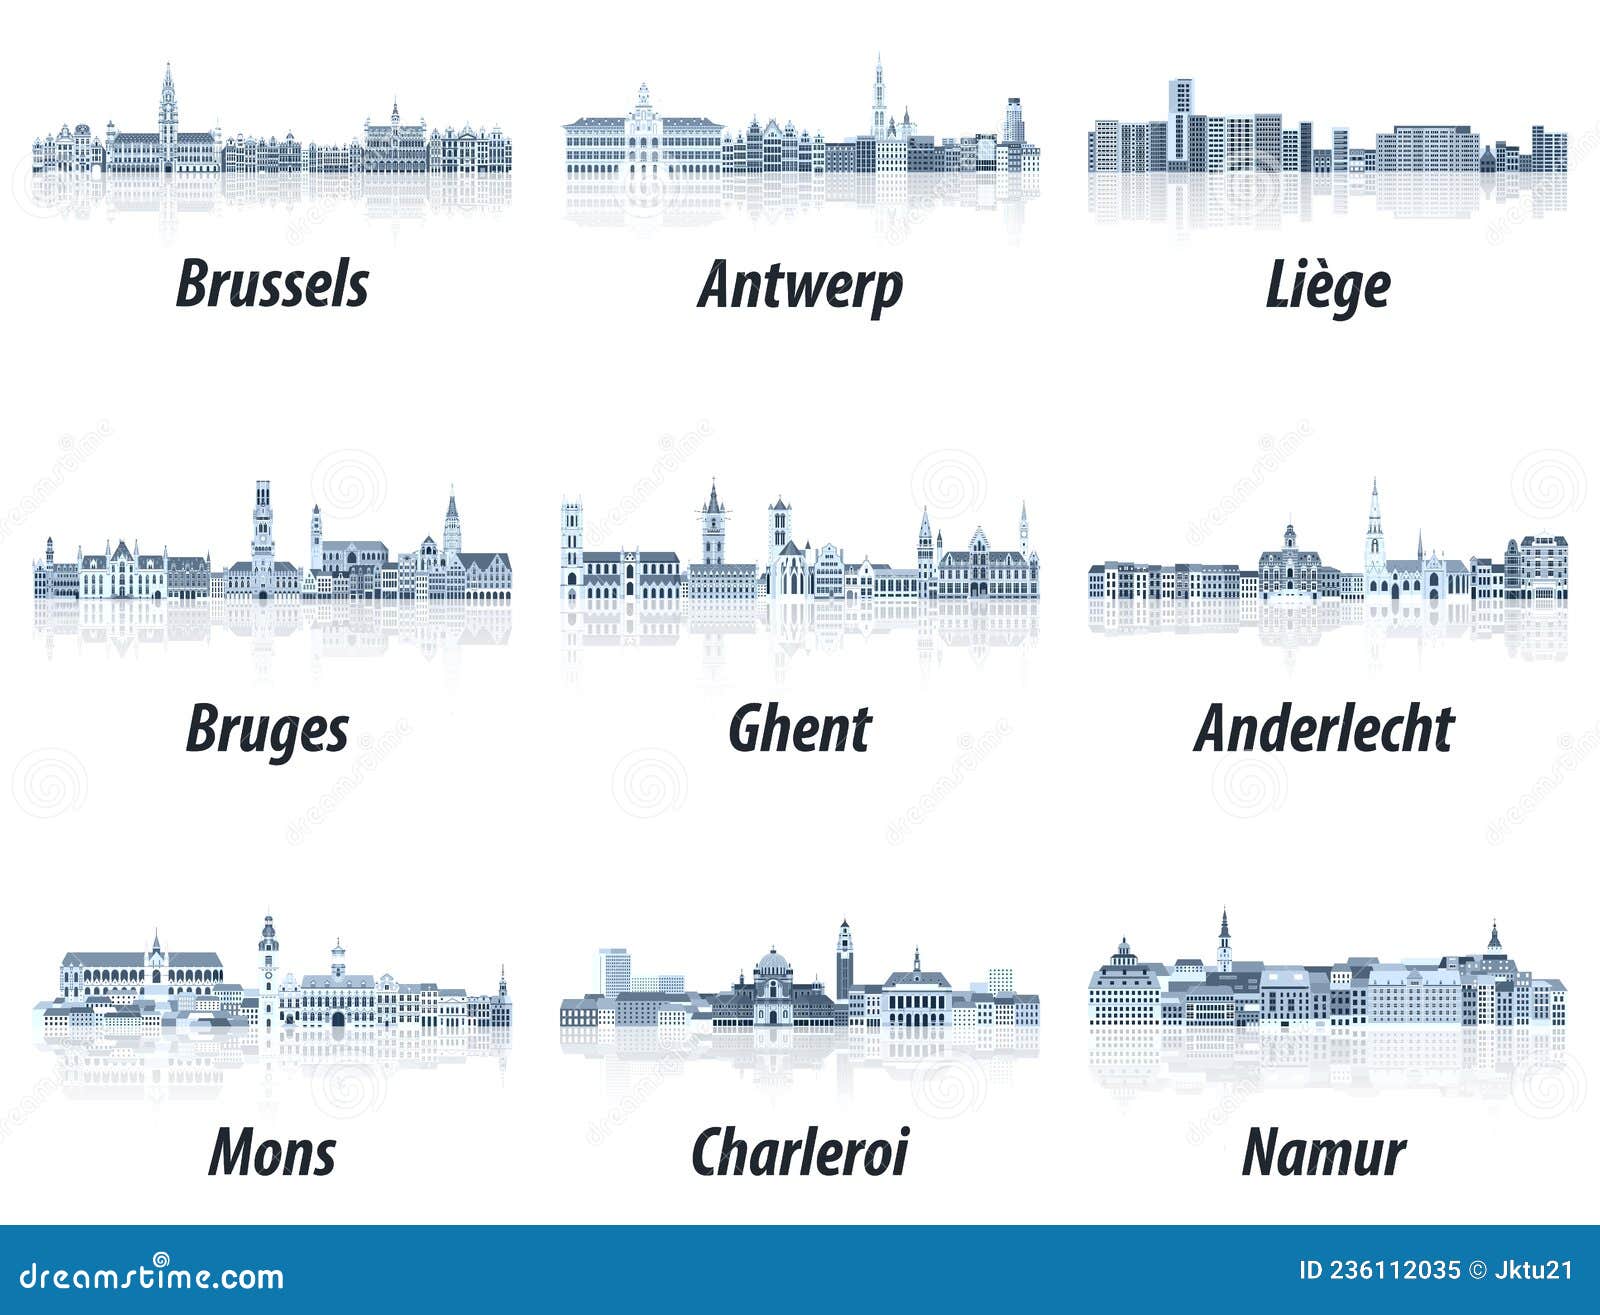 belgium main cities cityscapes in tints of blue color palette.cÂ¡rystal aesthetics style